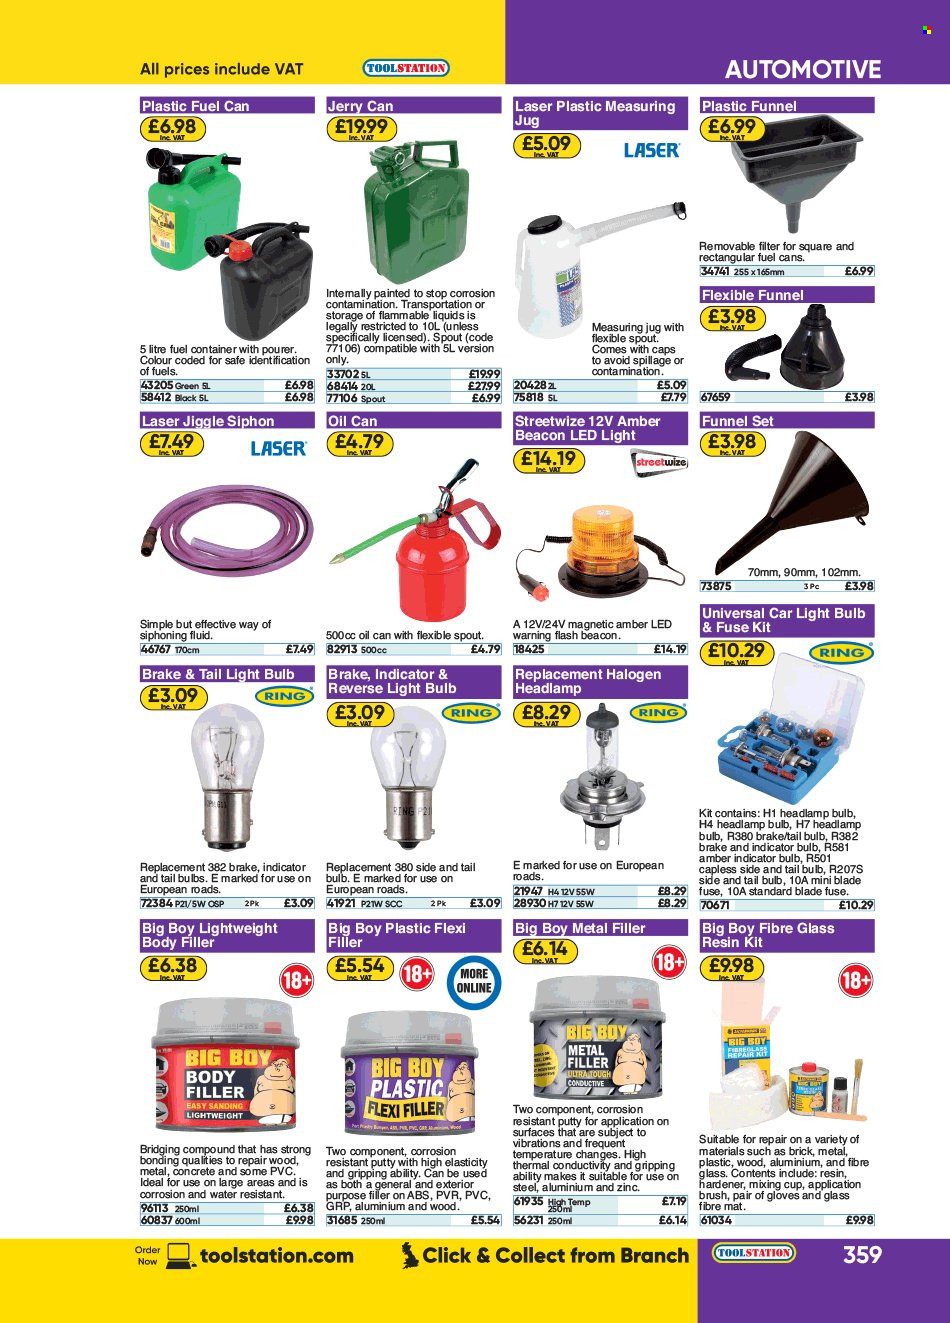 Toolstation offer . Page 359.